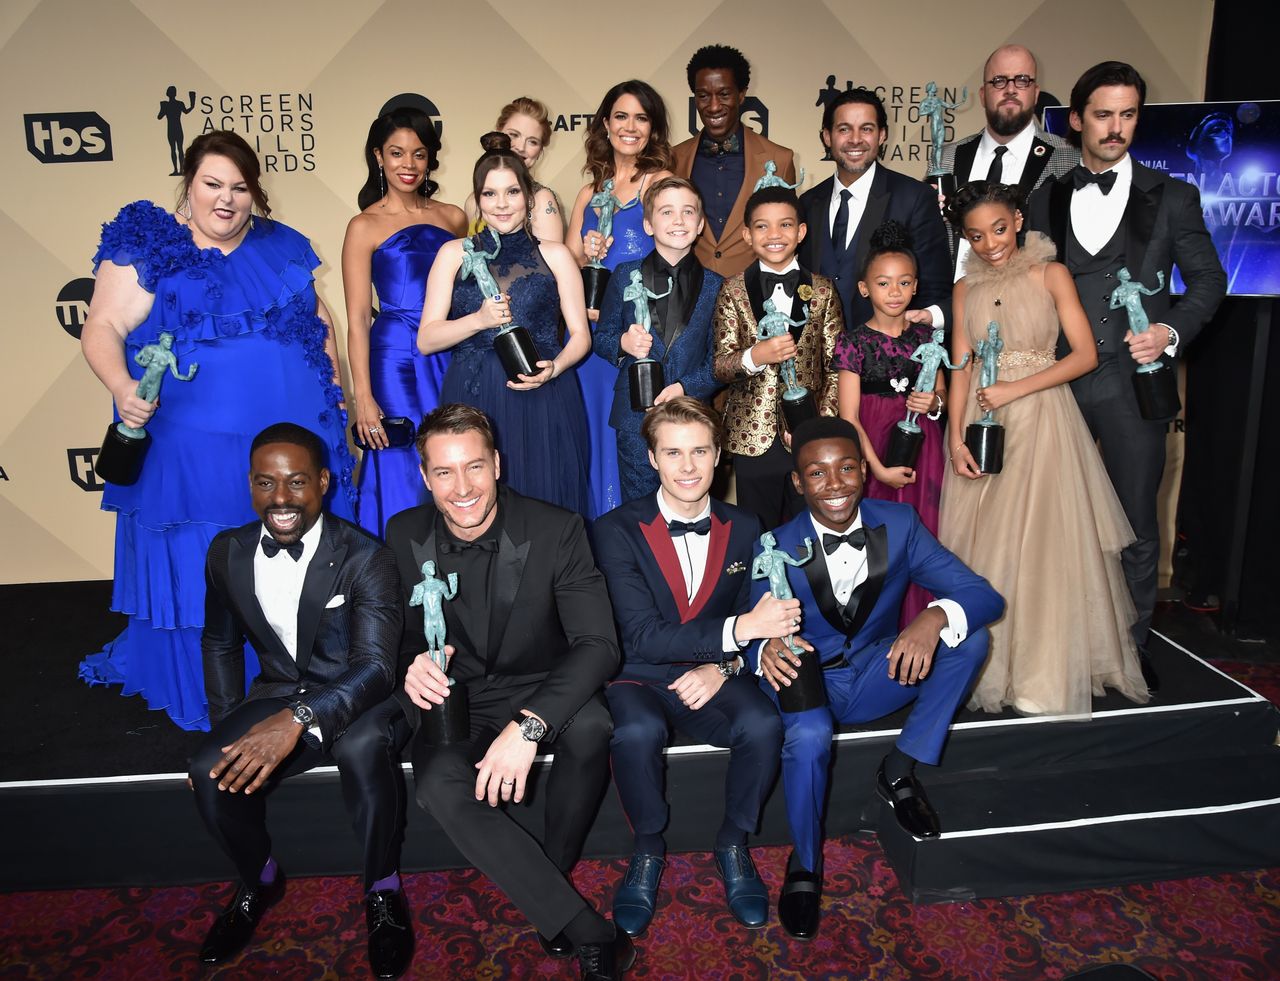 The actors of "This Is Us," winners of Outstanding Performance by an Ensemble in a Drama Series, pose at the Screen Actors Guild Awards in January.